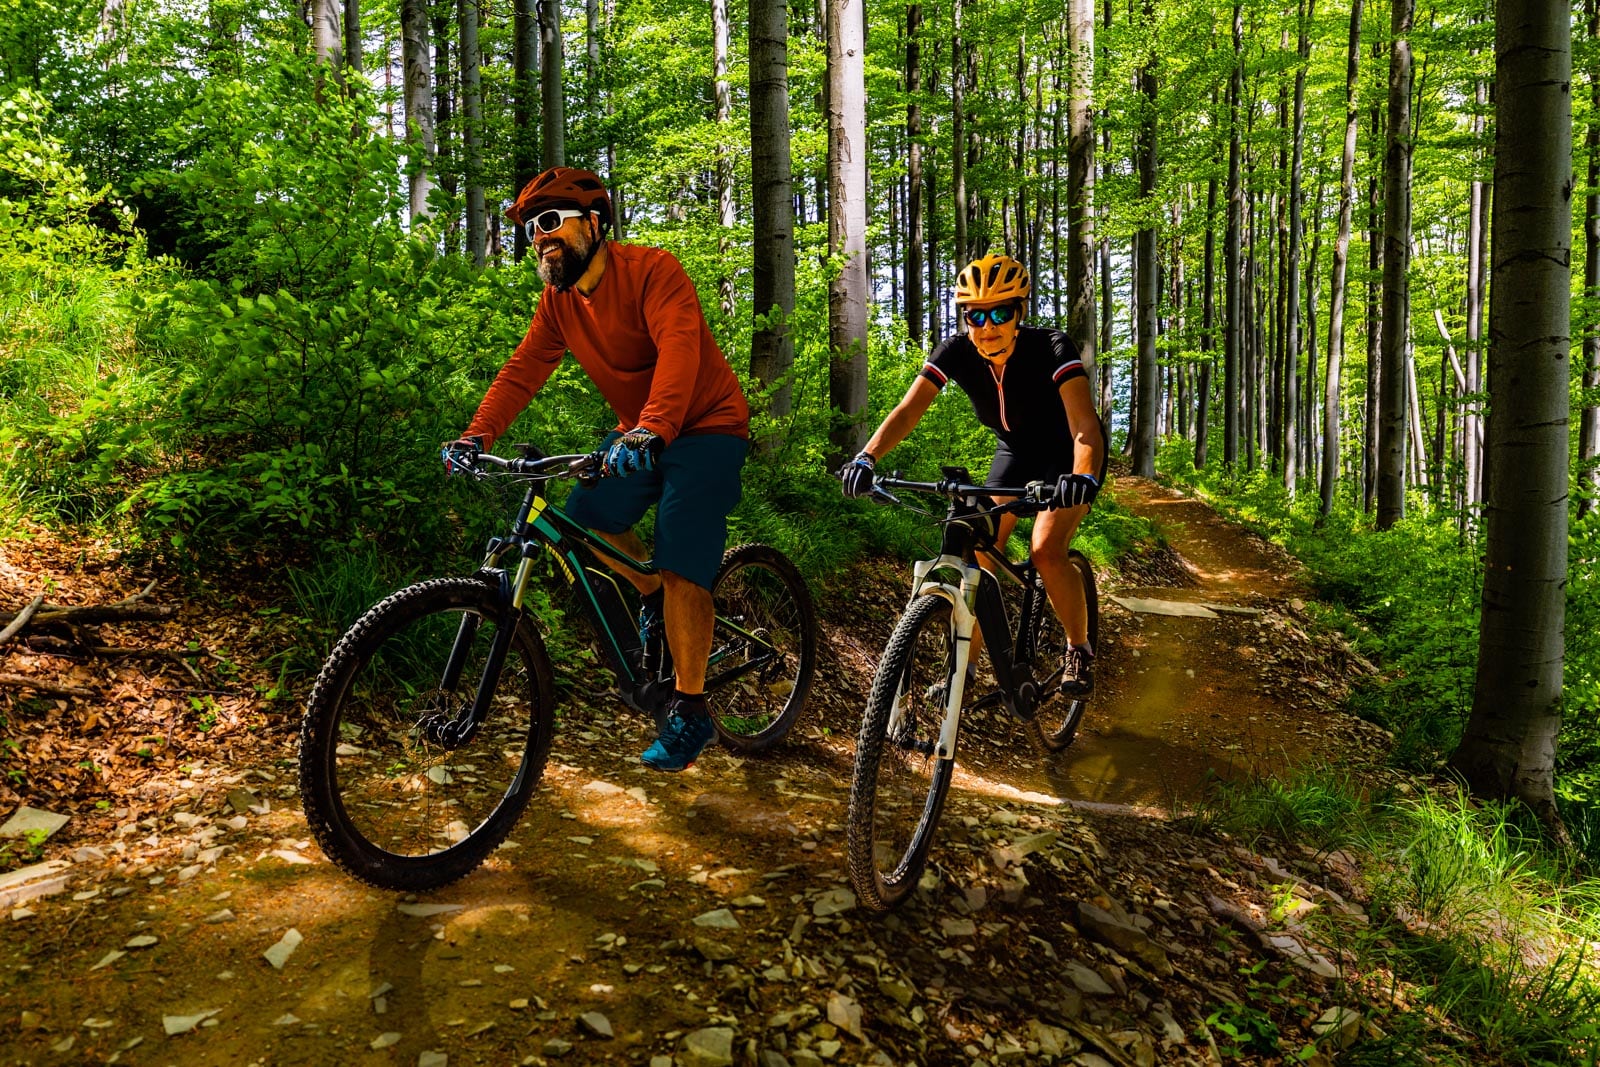 Two mountain bikers riding down a trail in the woods.